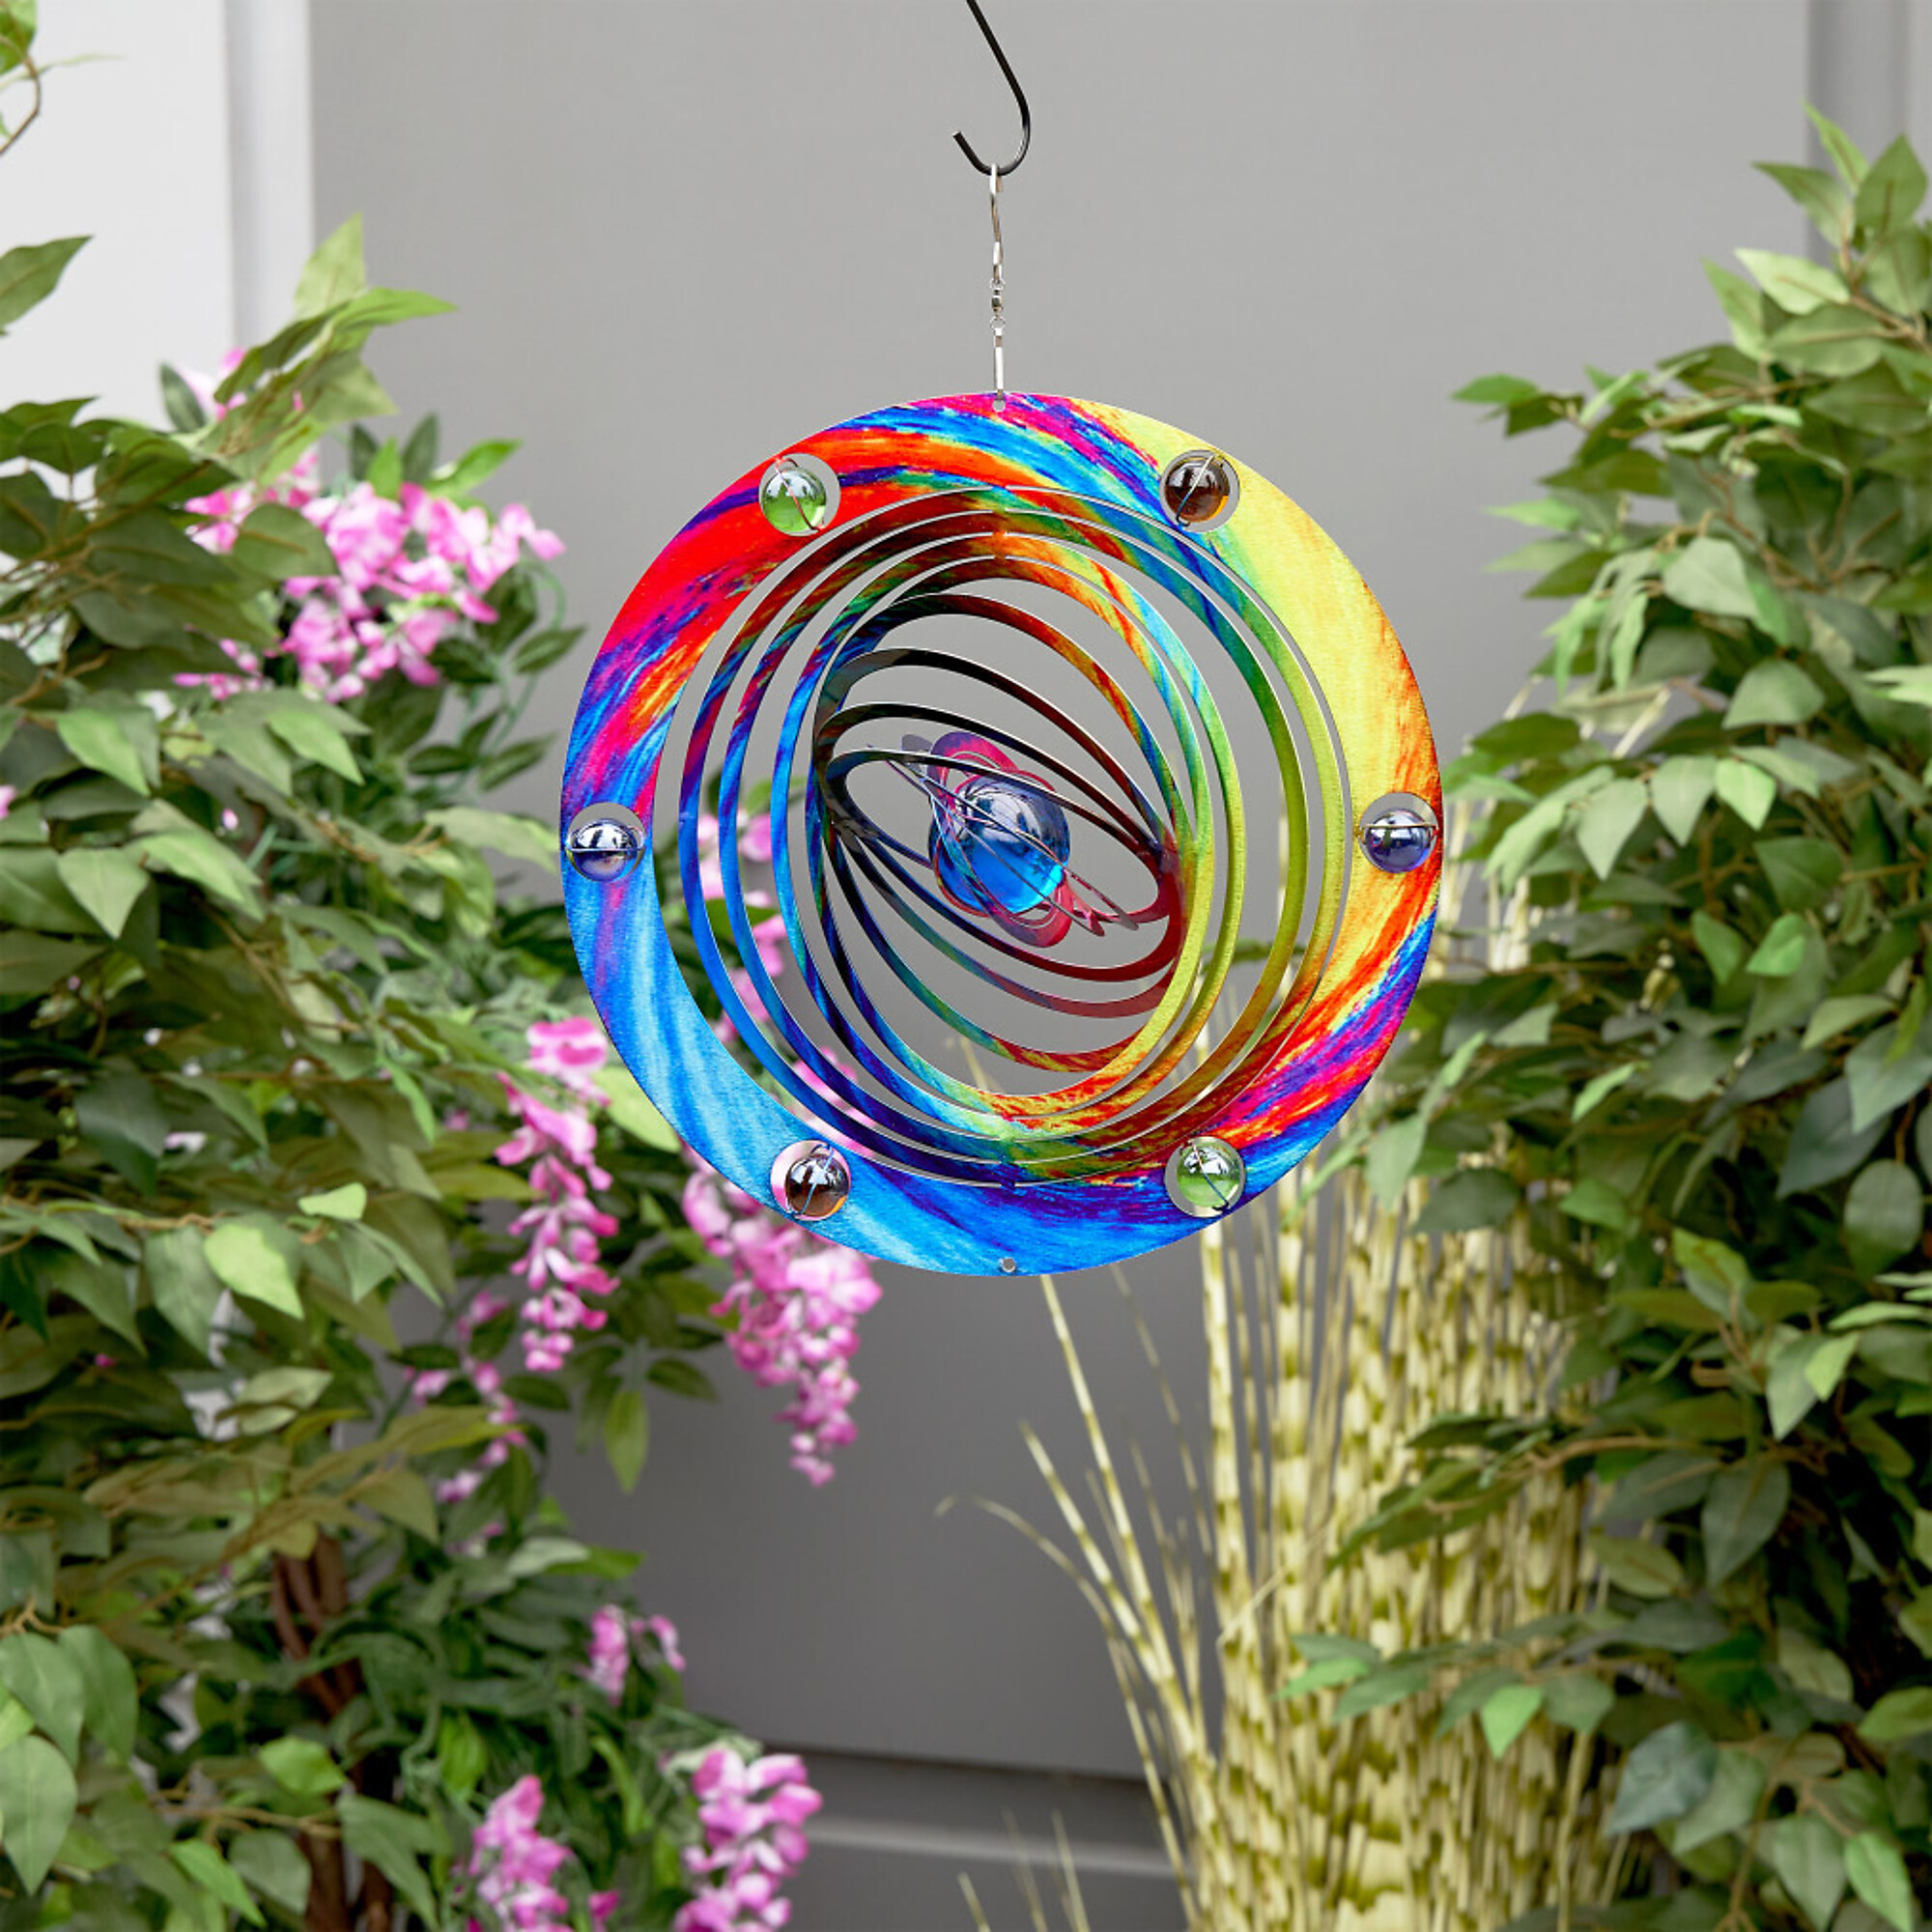 Alpine Corporation, Hanging Planets Wind Spinner w/Glass Ball,Colorful, Model IFF212